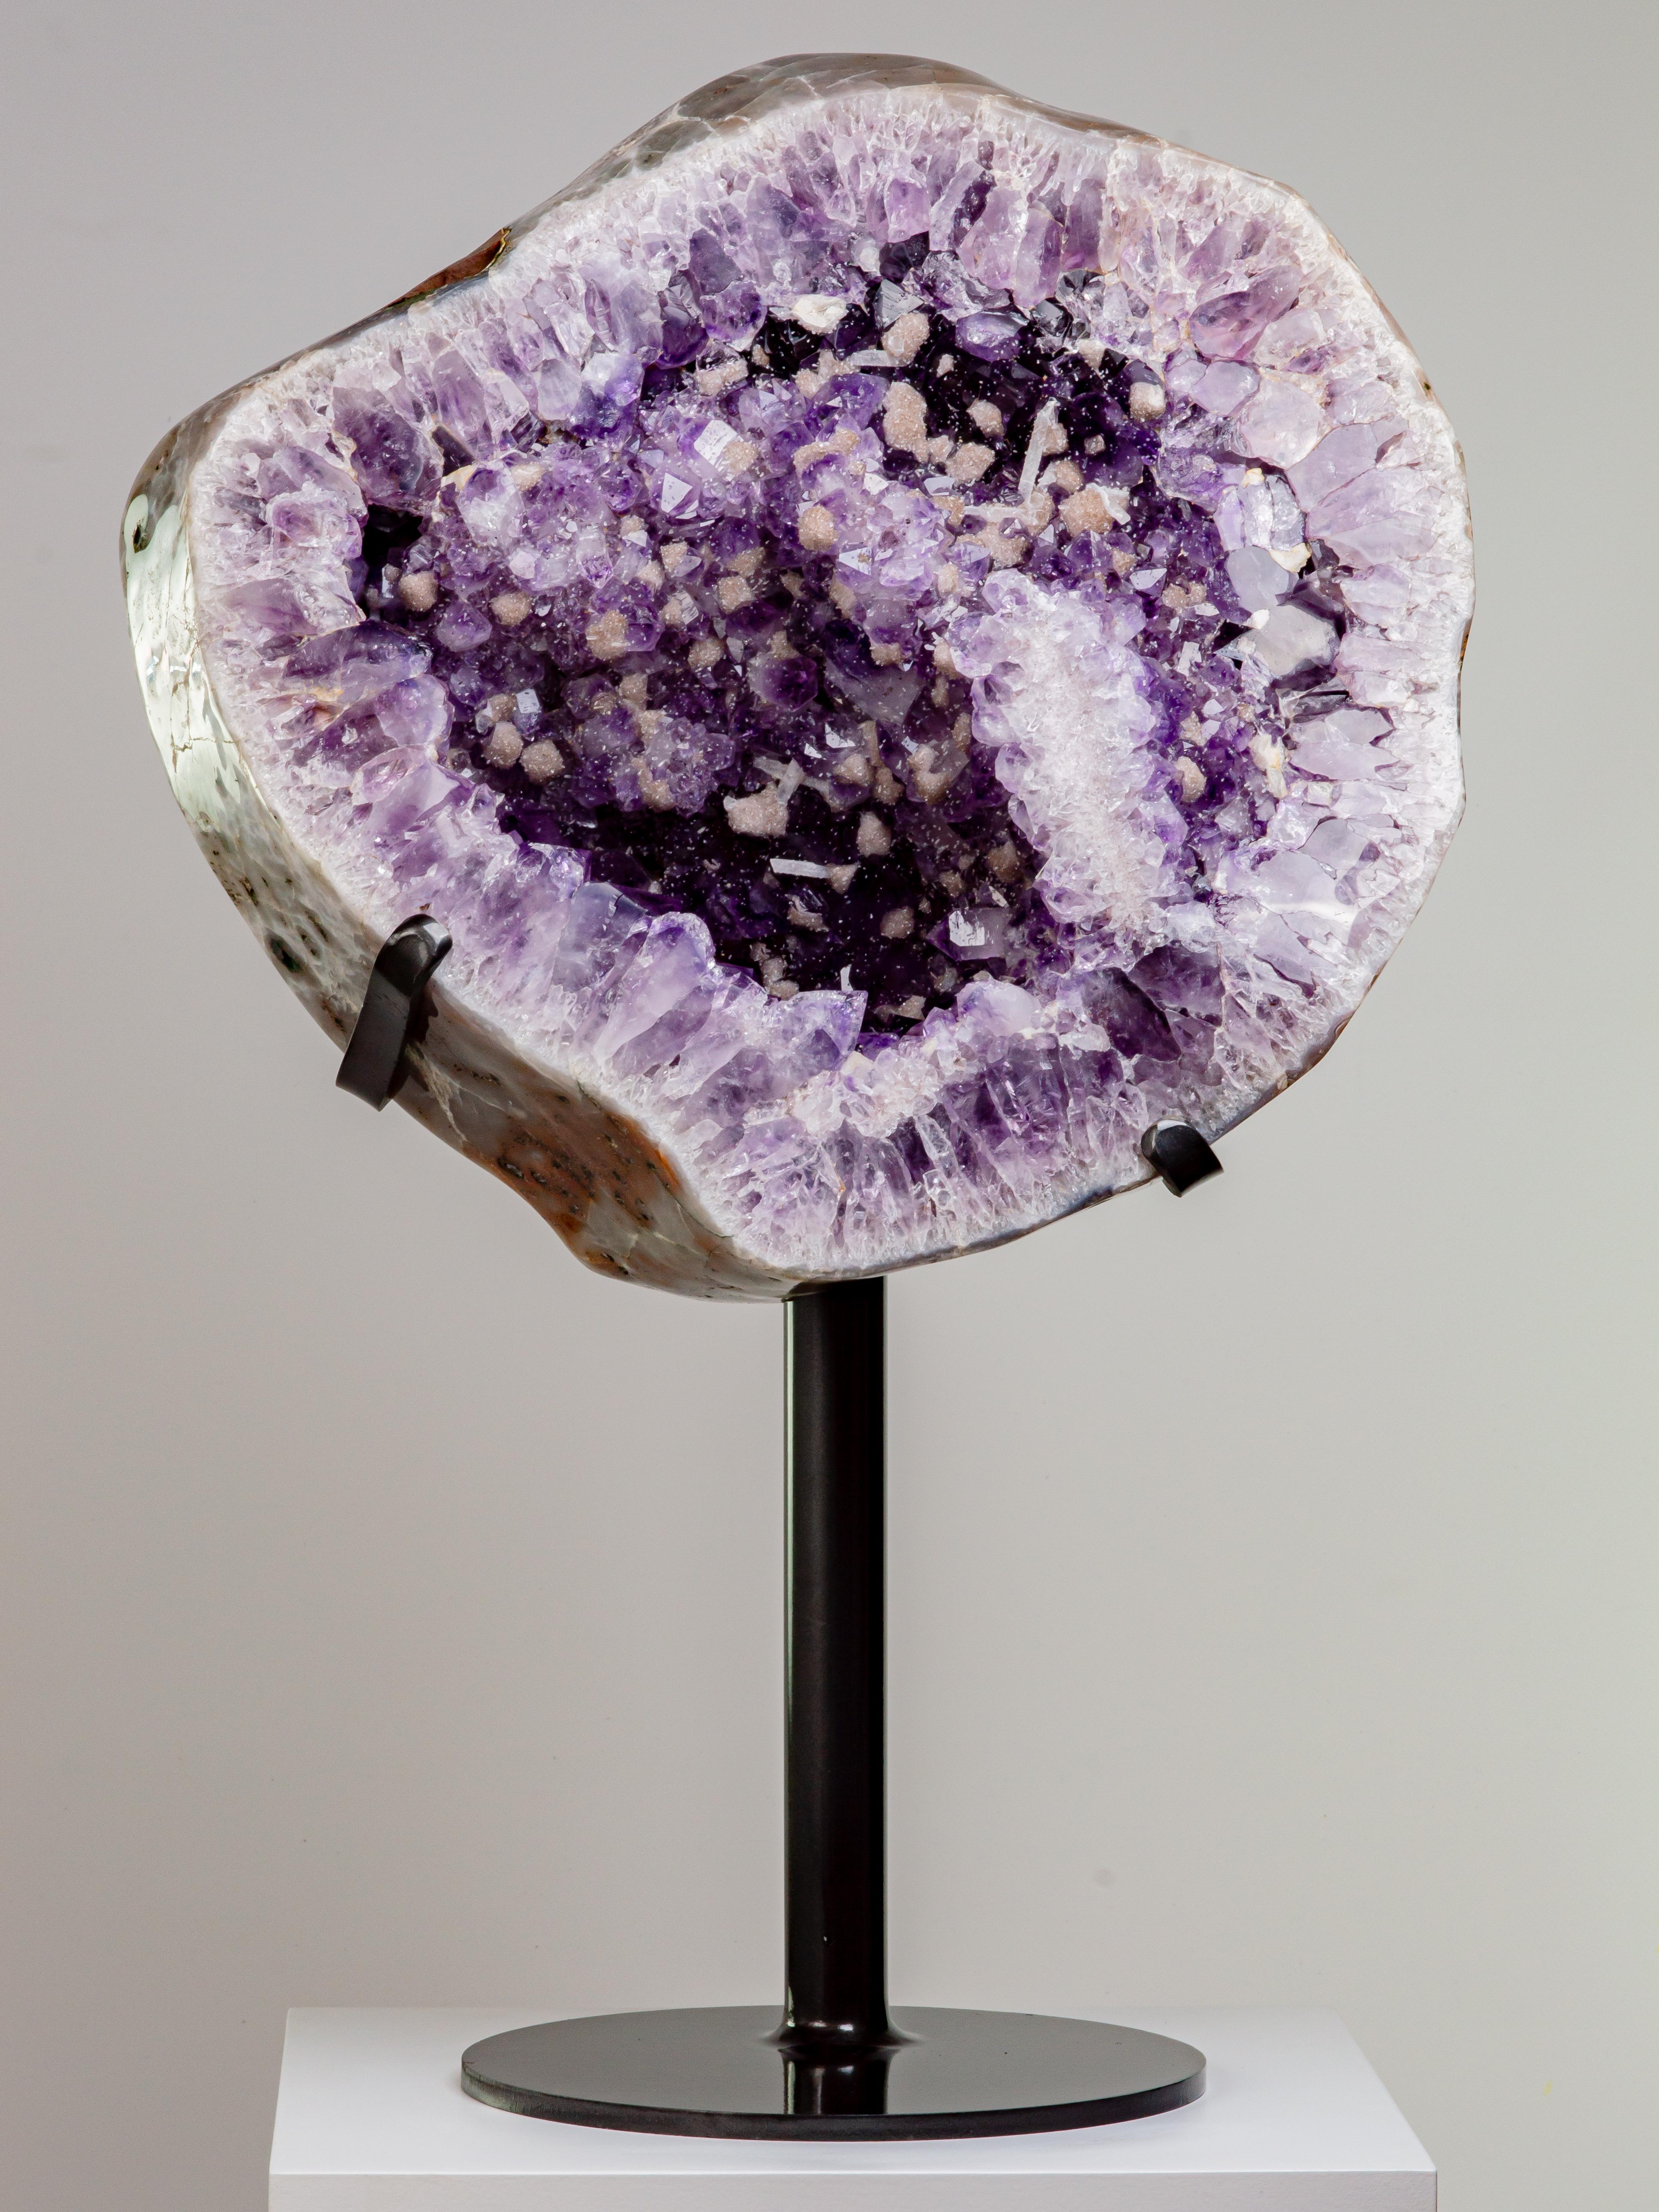 This striking circular slice preserves the end of a large geode. Lined with deep
purple, high peaked amethyst crystals, this wonderful piece is punctuated with
small calcites overlaid with druzy quartz, resembling snowballs. Further sprinkles
of